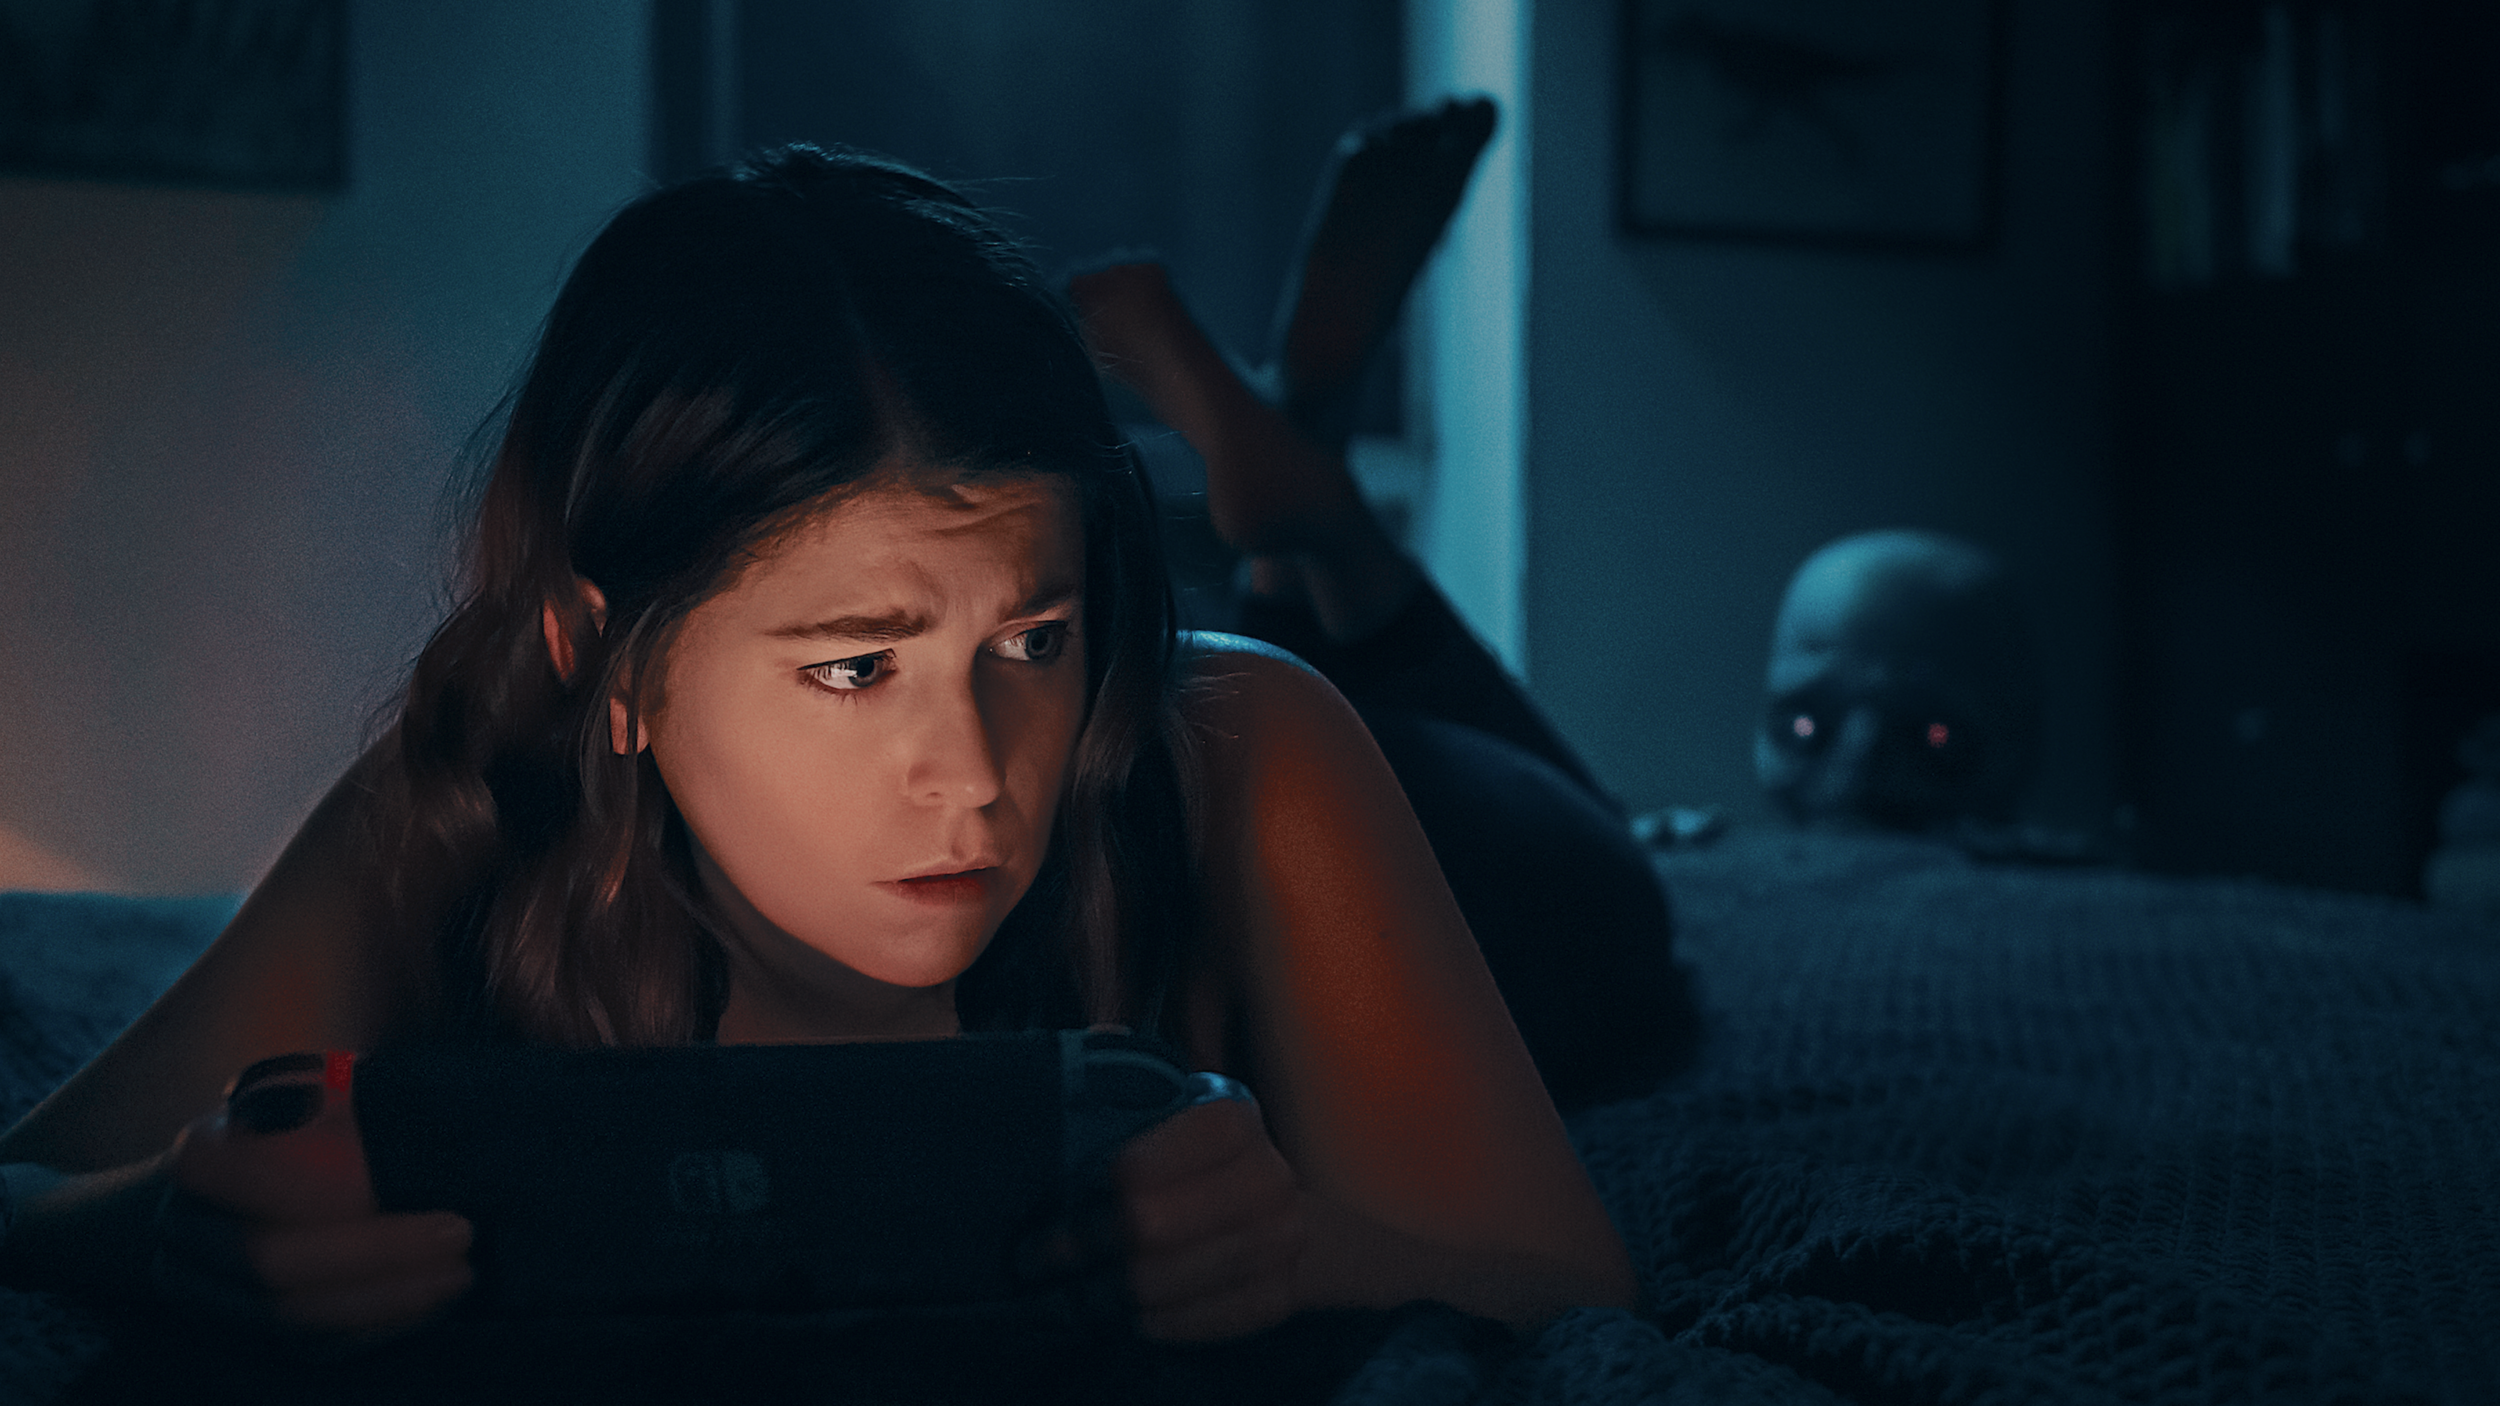 SXSW 2021 Short Films Review] Horror Shorts 'The Thing That Ate the Birds'  'A Tale Best Forgotten' and 'Don't Peek' Bring Surprises — Gayly Dreadful  -- Bursting out of your closet with